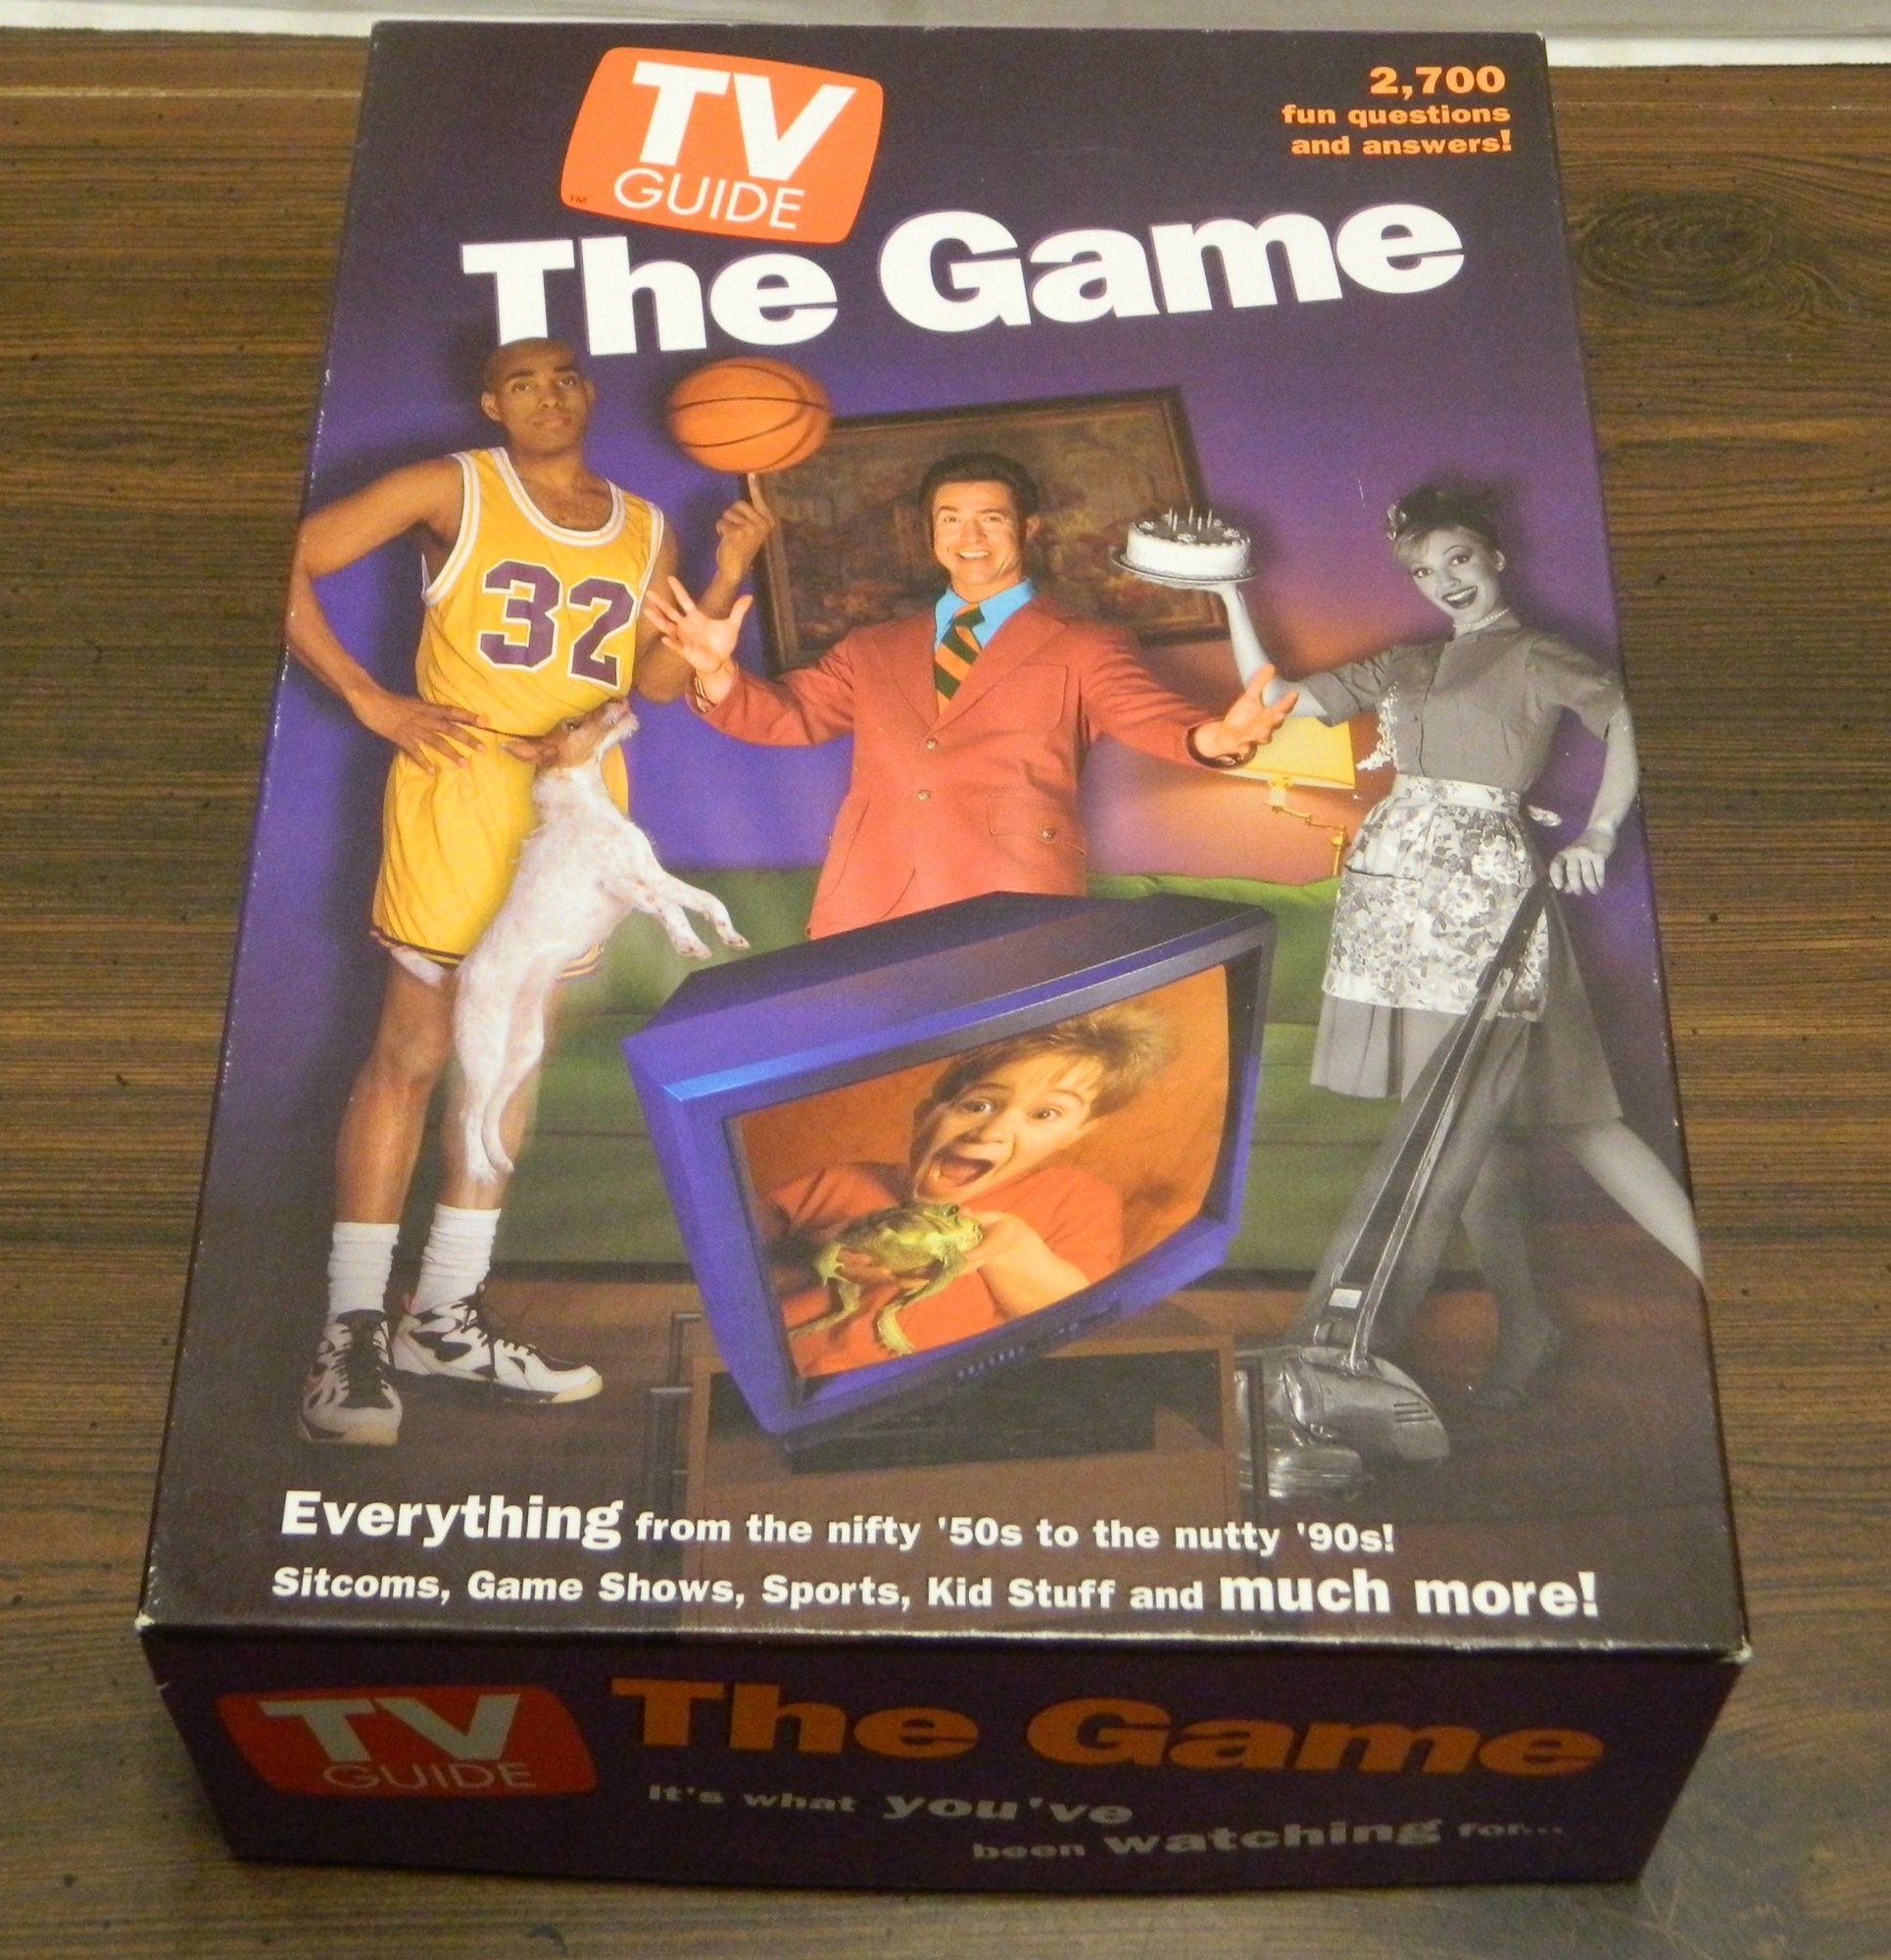 TV Guide: The Game Board Game Review and Rules